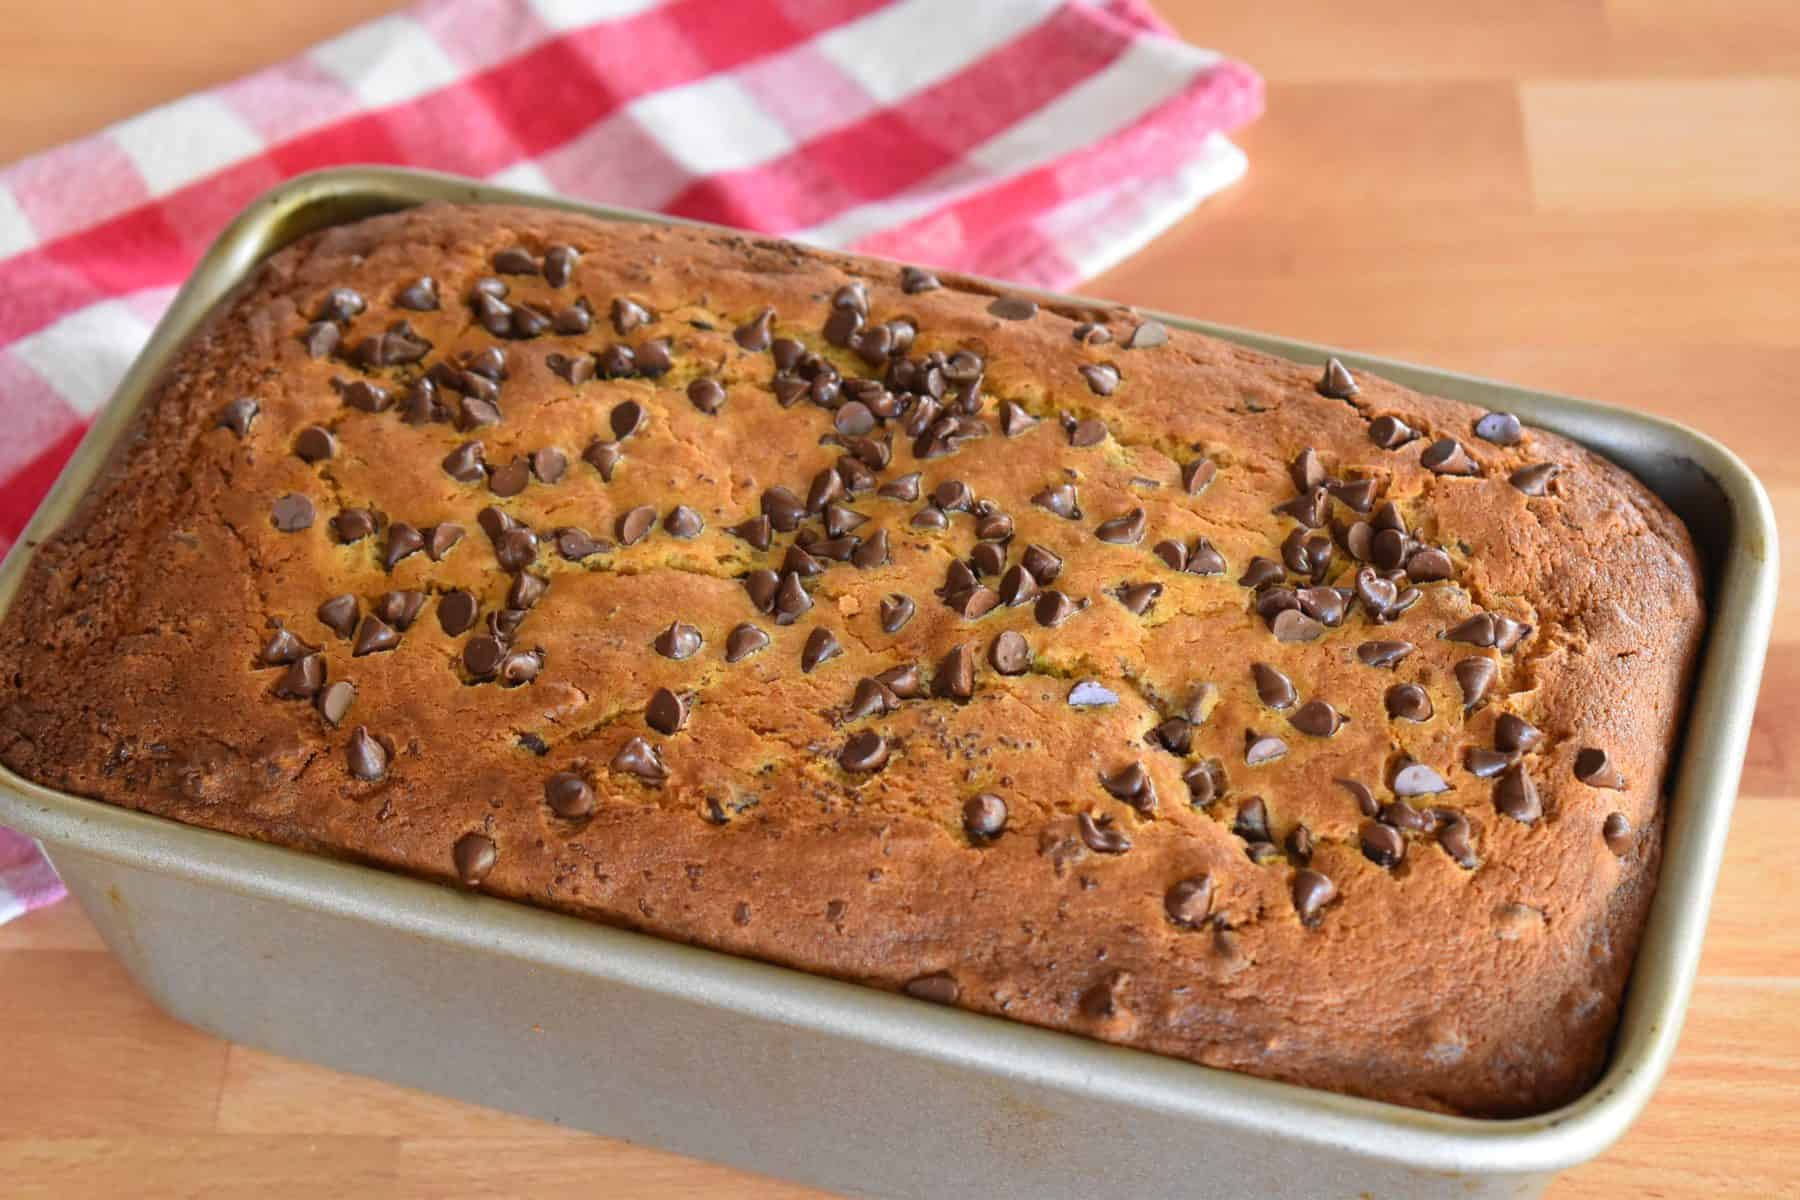 Baked loaf with chocolate chips sprinkled on top. 